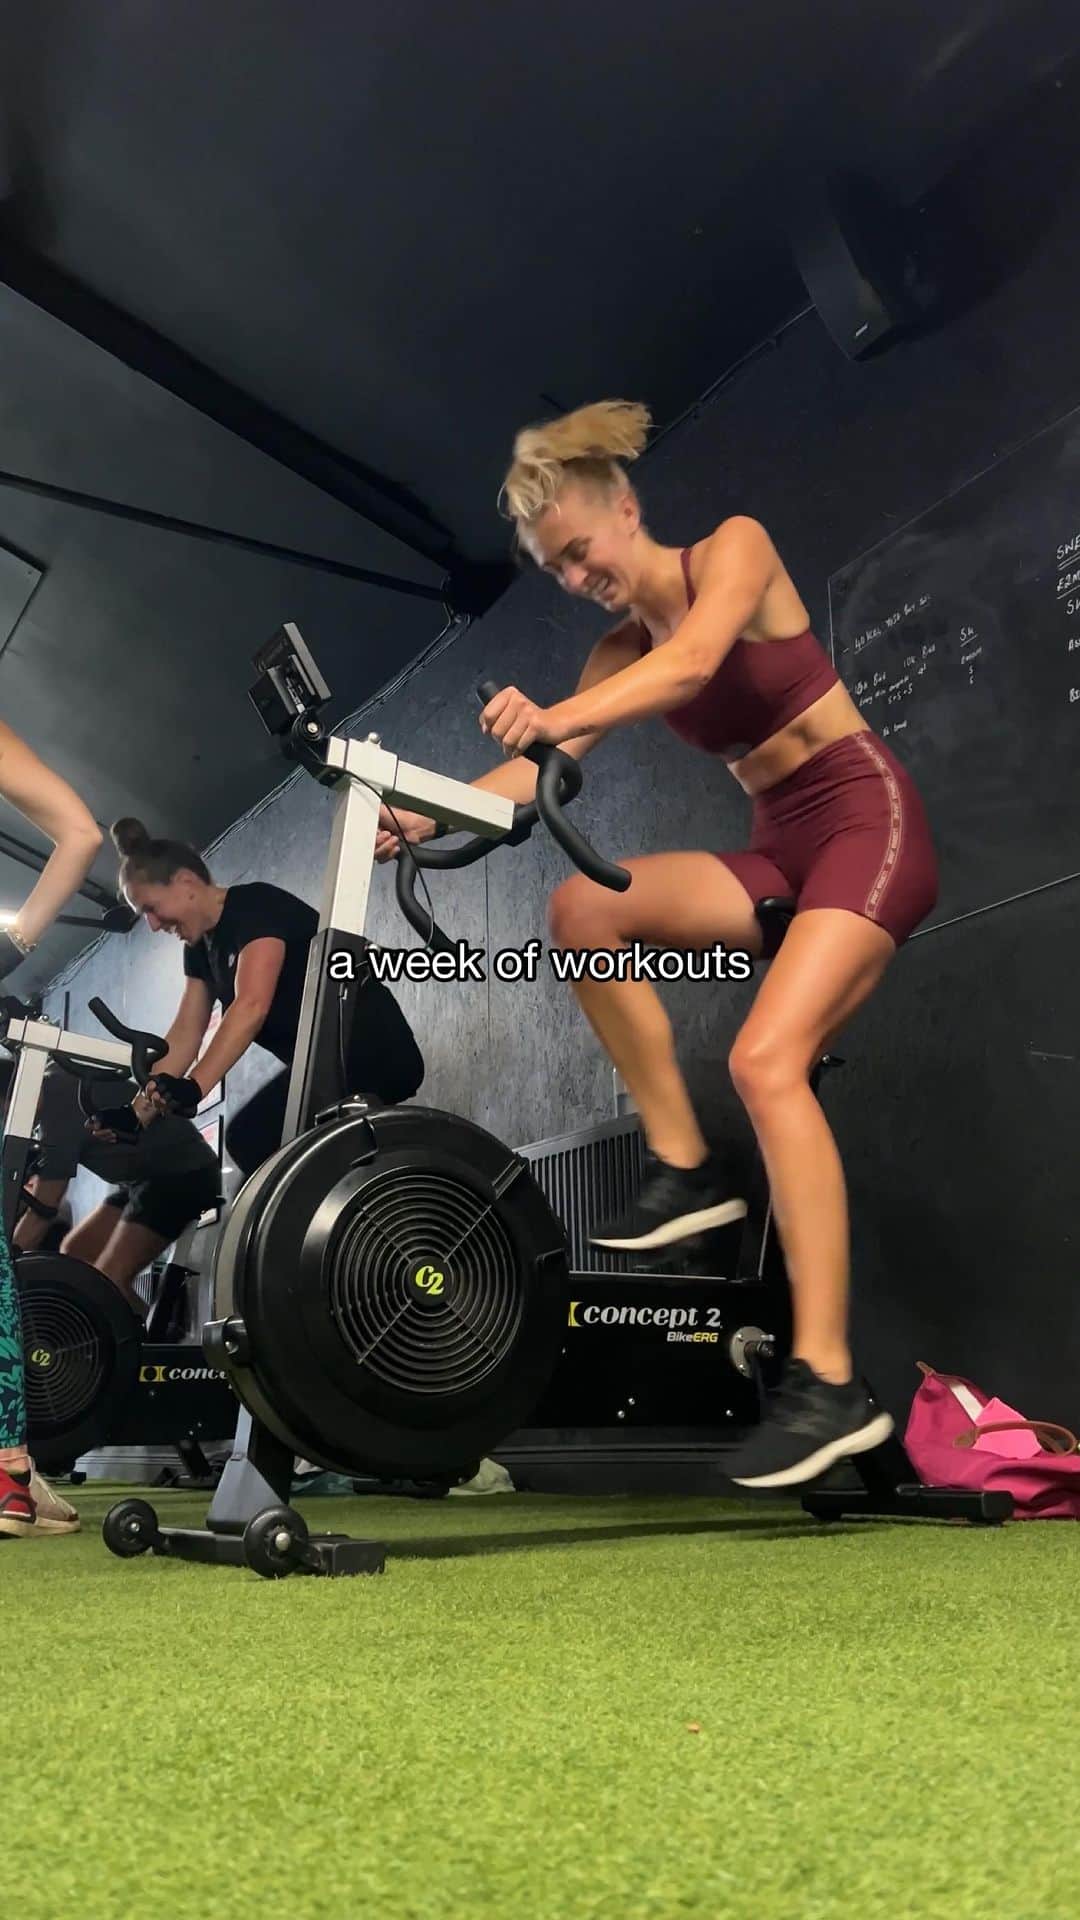 Zanna Van Dijkのインスタグラム：「A week of my workouts 🏋🏼‍♀️   Here is a typical week of exercise for me: ➡️ My main priority is fitting in my strength training as that supports my hiking goals, but everything around that is pretty flexible. My program is written by my pal @max.lowery. ➡️ Maintaining my cardiovascular fitness is something I’m conscious of, but I don’t have a set structure with that - I love mixing it up with classes, runs and circuits. My cardio workouts are often social workouts where I see friends.  ➡️ I take a minimum of two rest days a week. I find this allows me recover fully and therefore perform better ☑️   Let me know in the comments if you want me to share more videos like this? ♥️ #weekofworkouts」